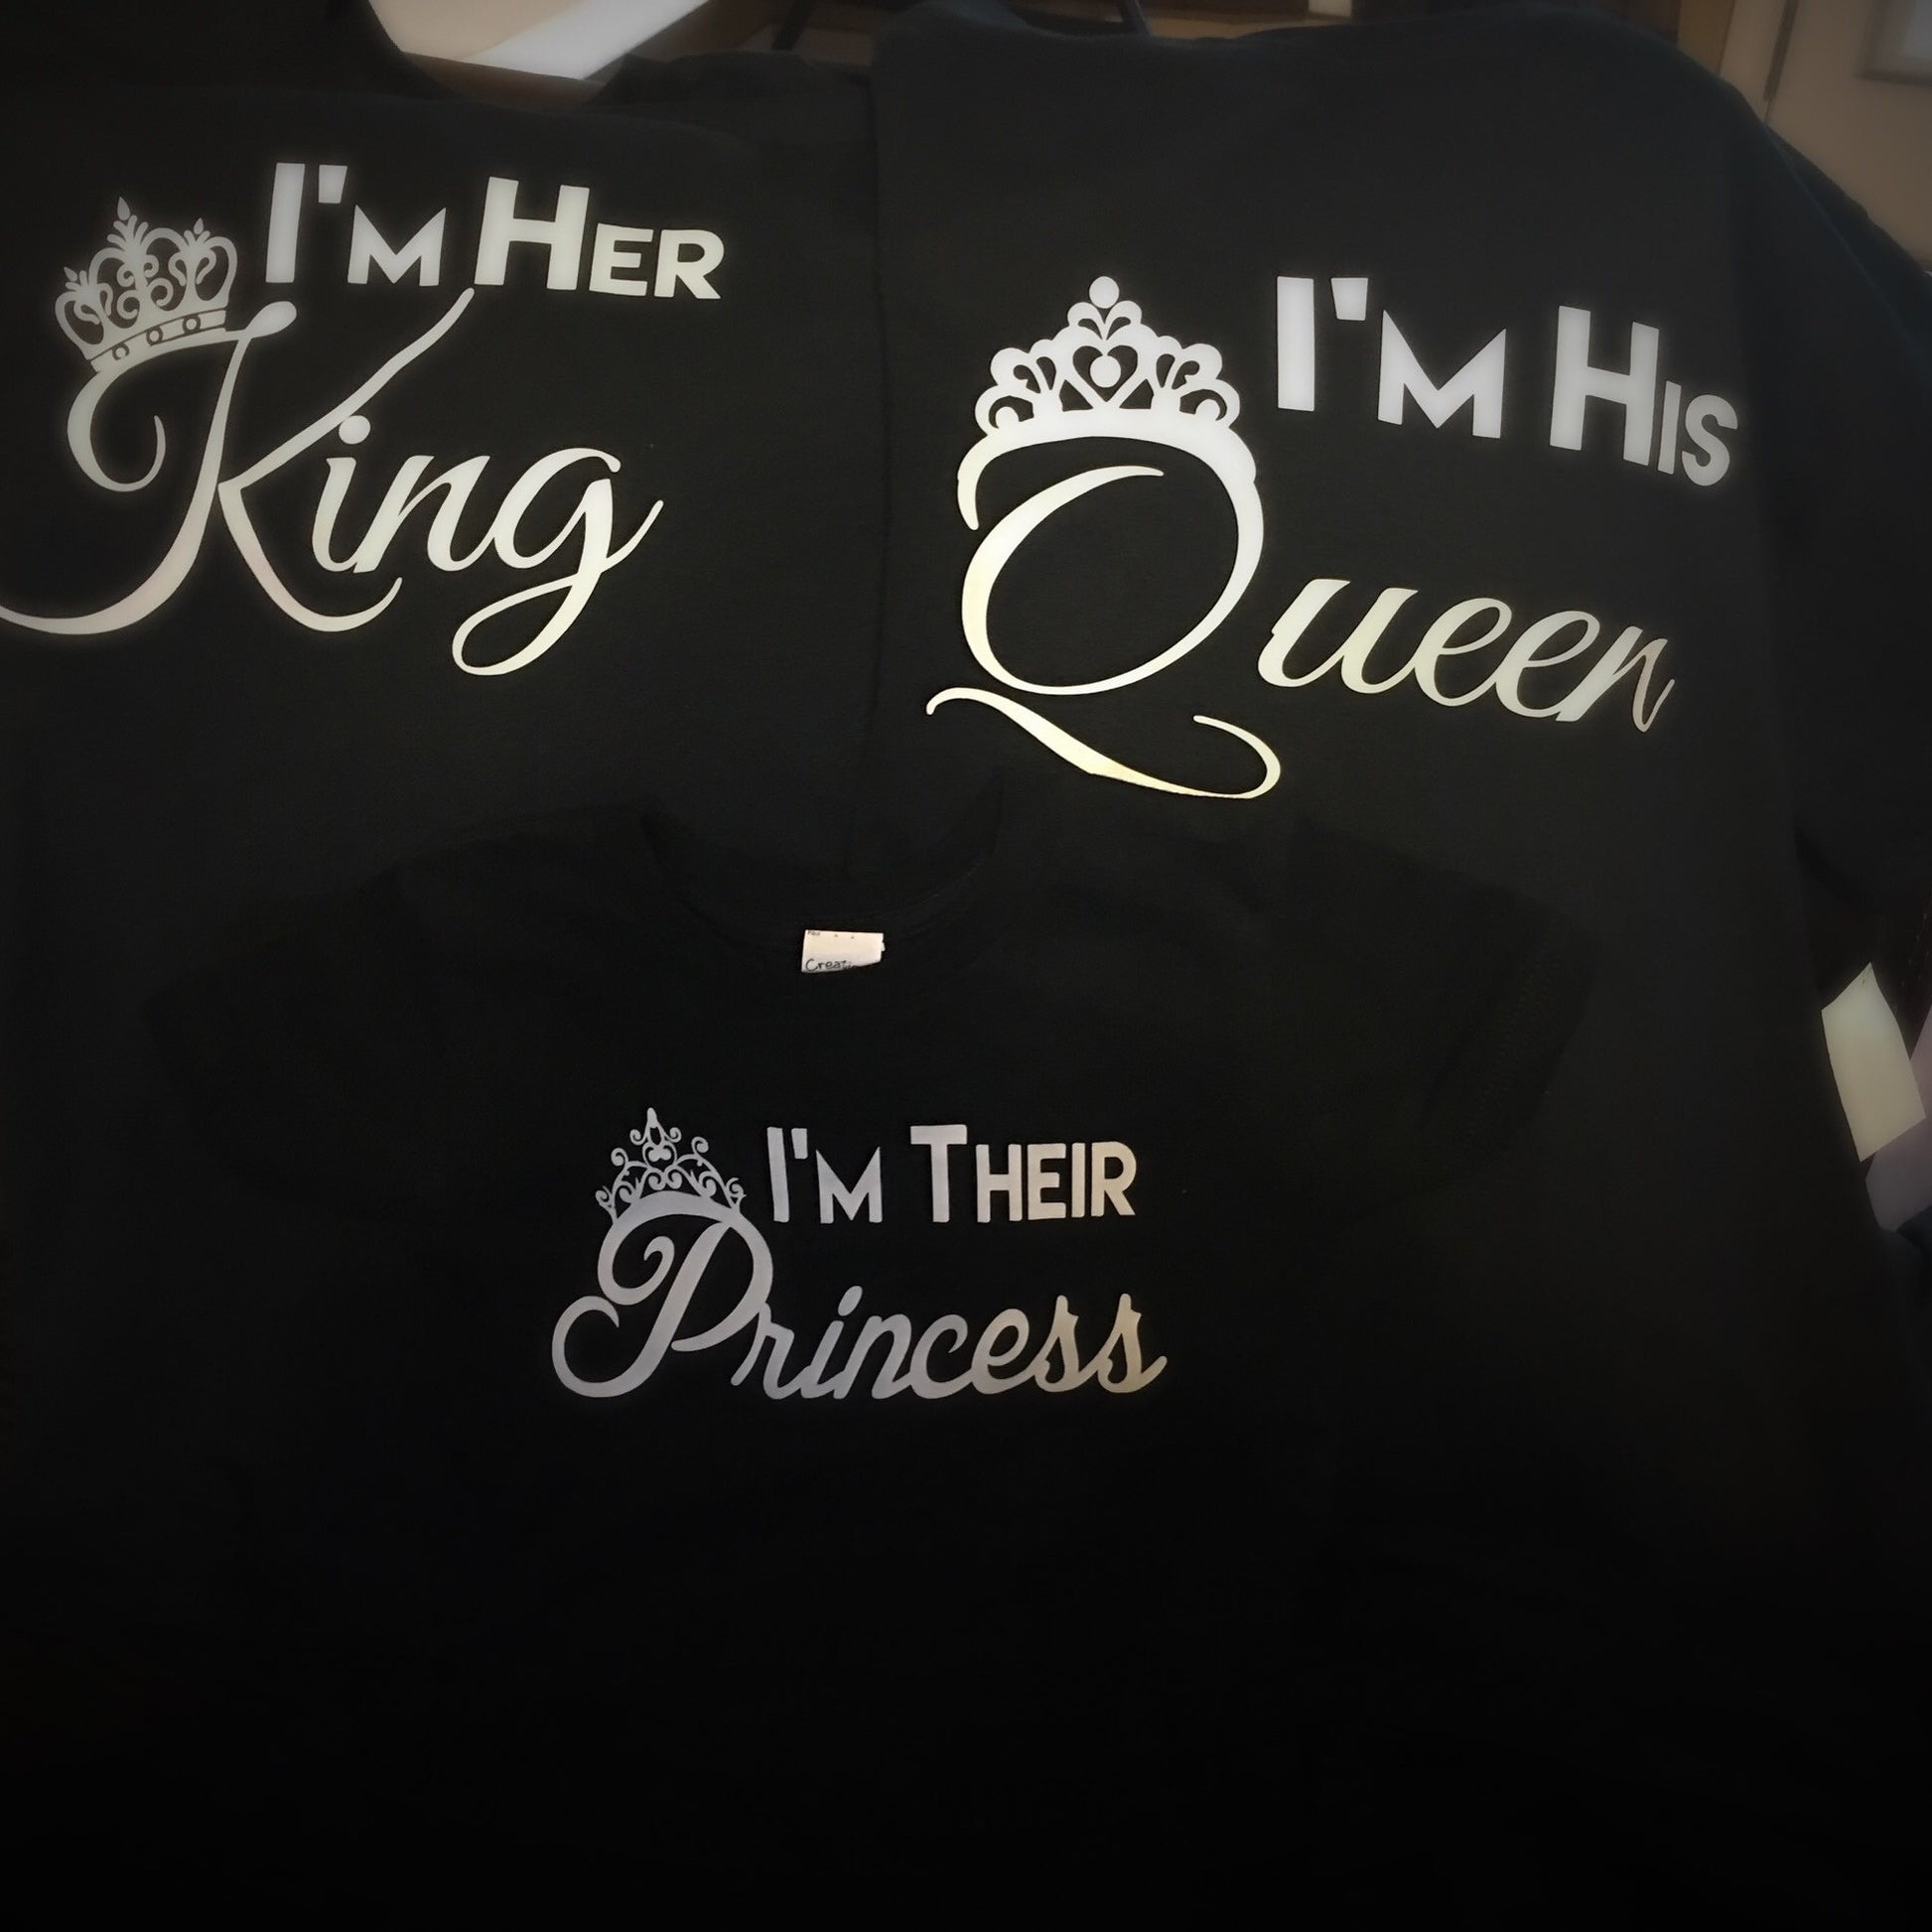 Family - King,Queen,Princess or Prince T-Shirt - White Graphics - 550strong